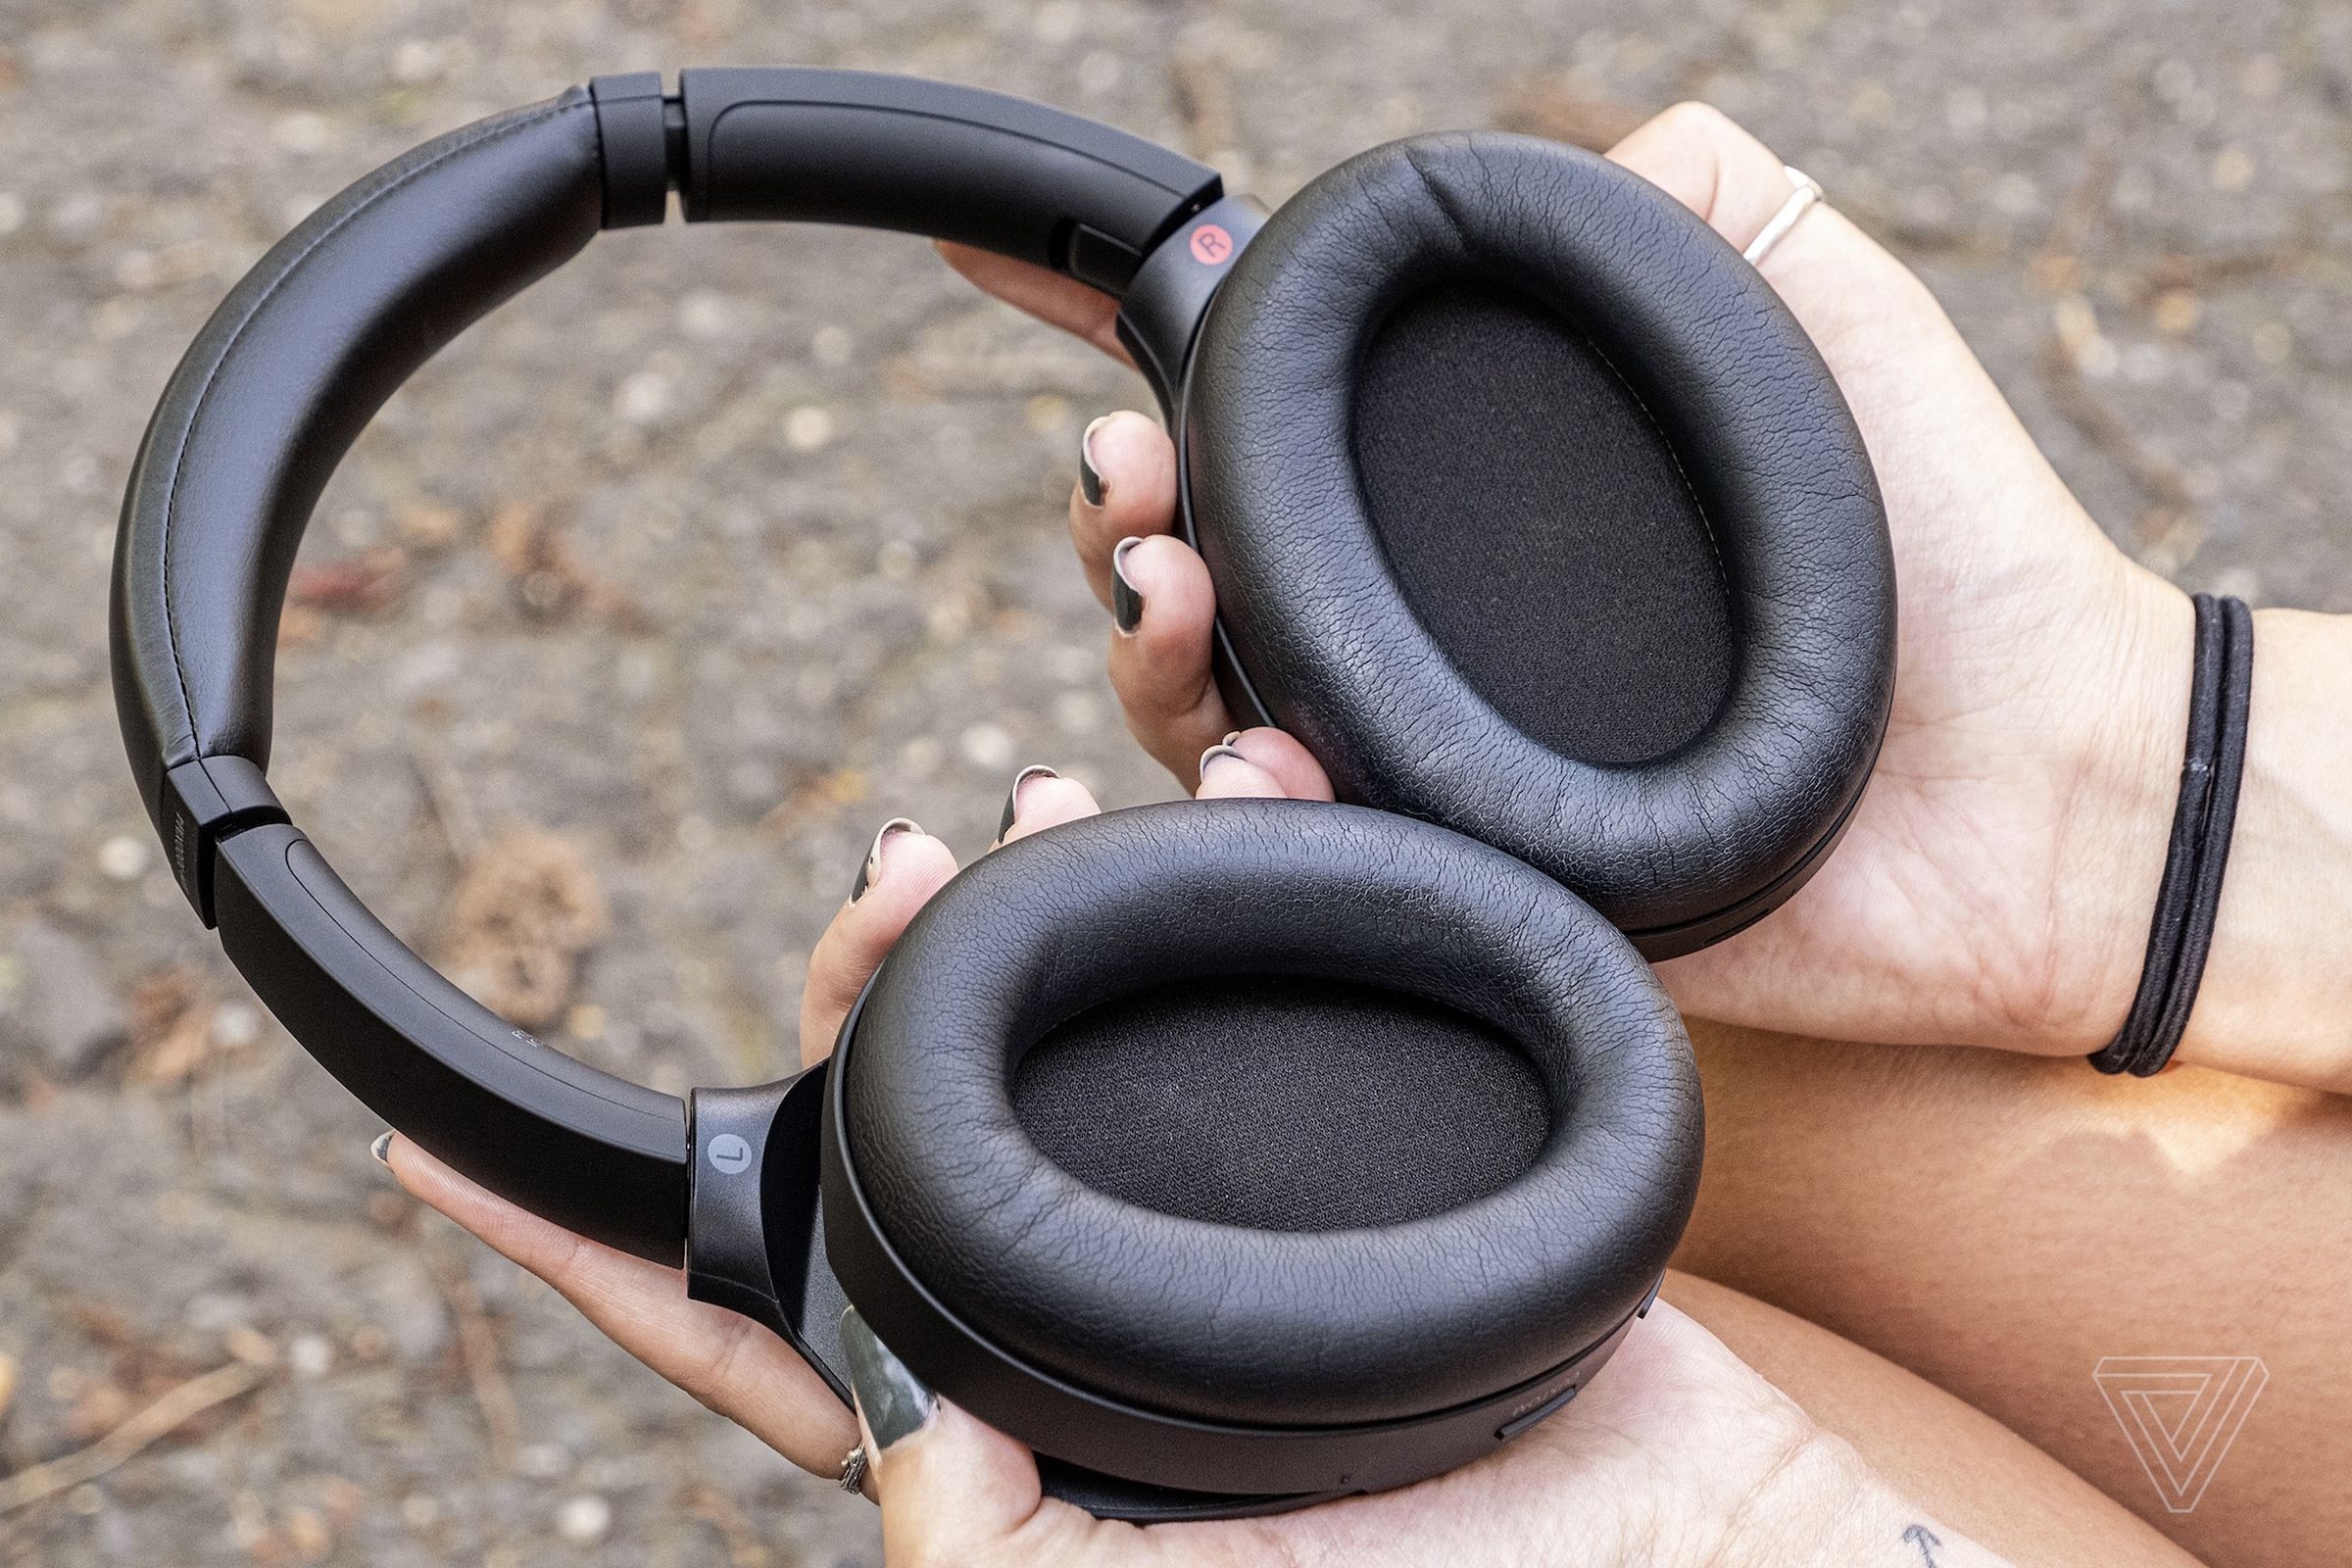 Sony has made small tweaks like slimming down the head cushion at top and increasing the surface area of the ear pads.